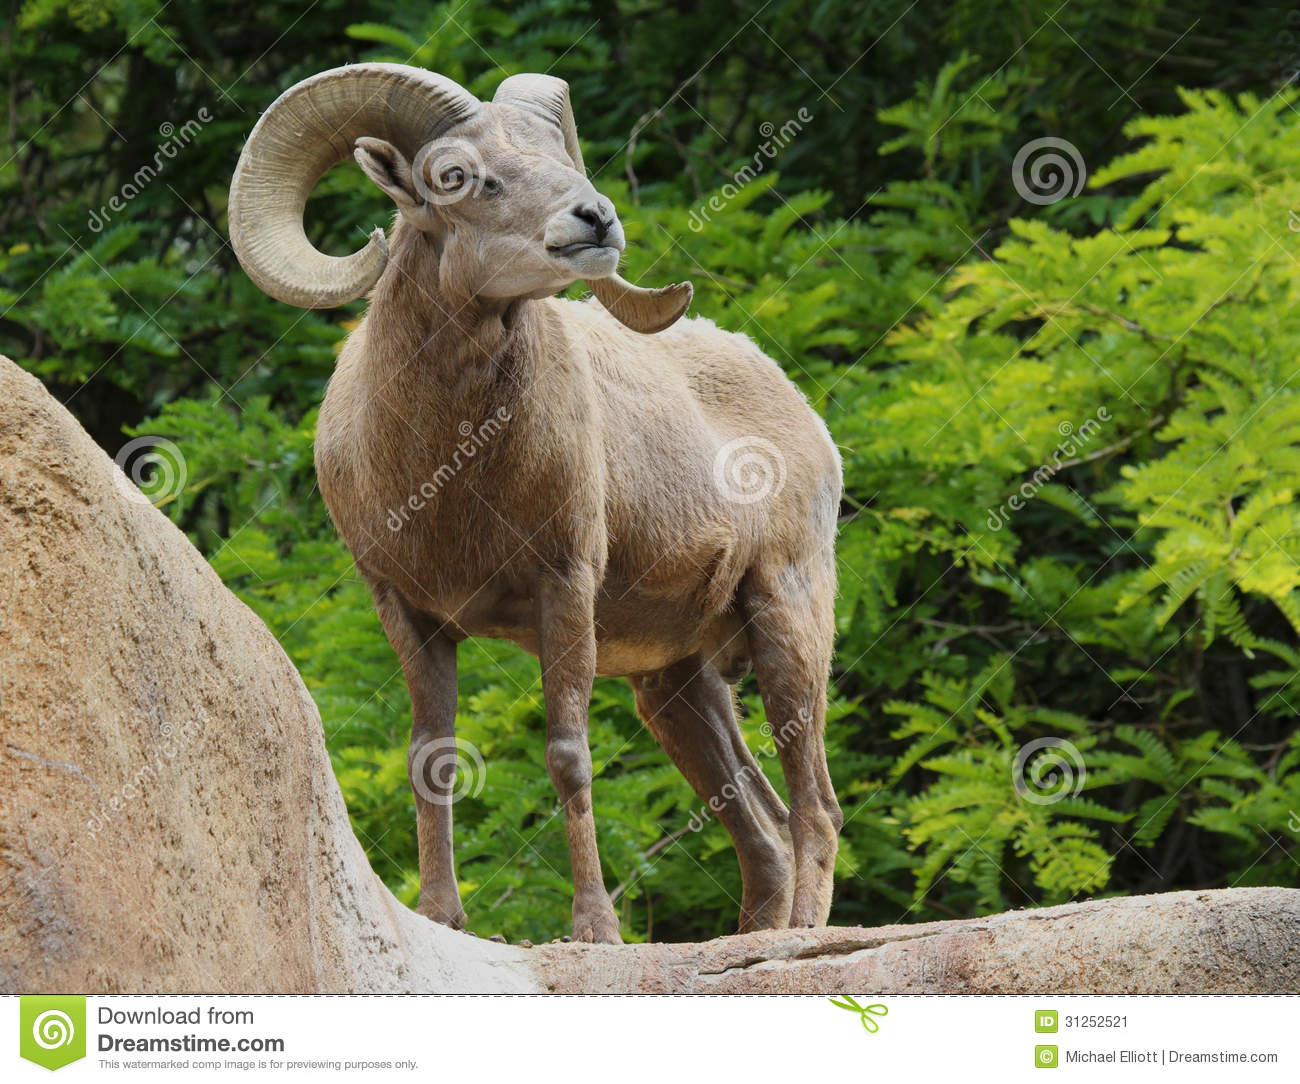 Male Desert Bighorn Sheep Displaying Huge Curved Horns Against Bright